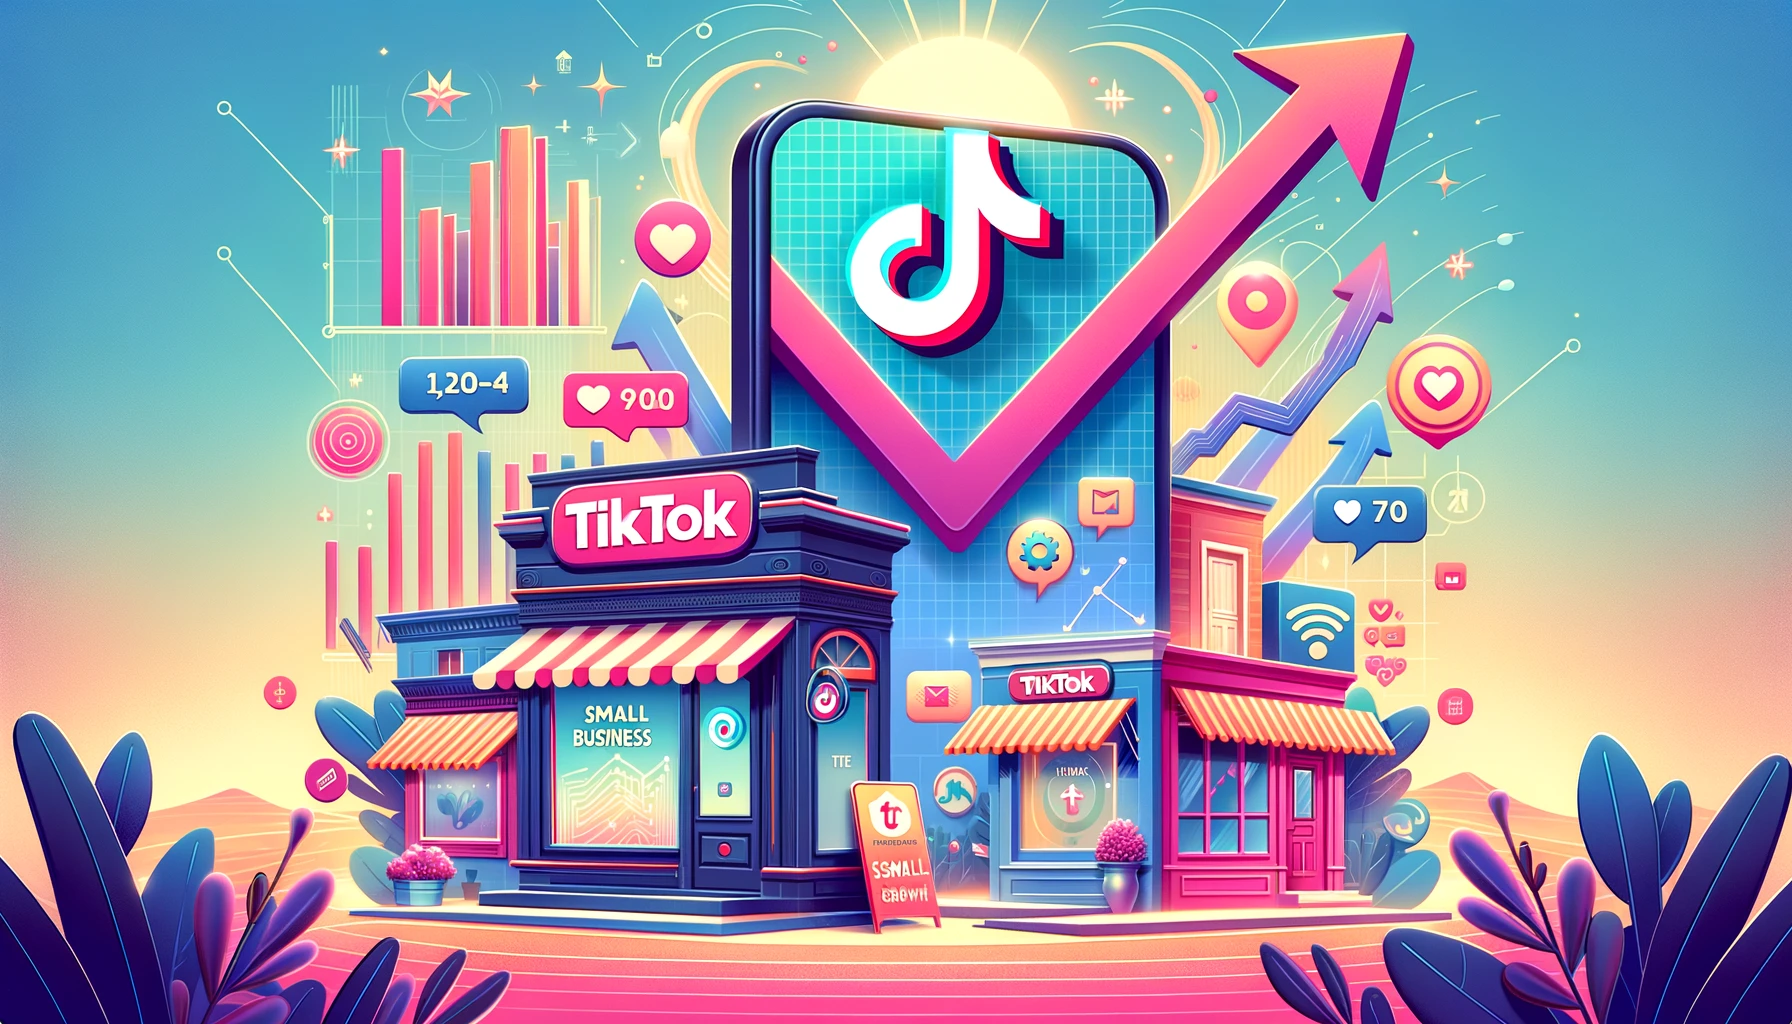 boost-your-small-business-on-tiktok-with-rank-panel-a-complete-strategy-guide